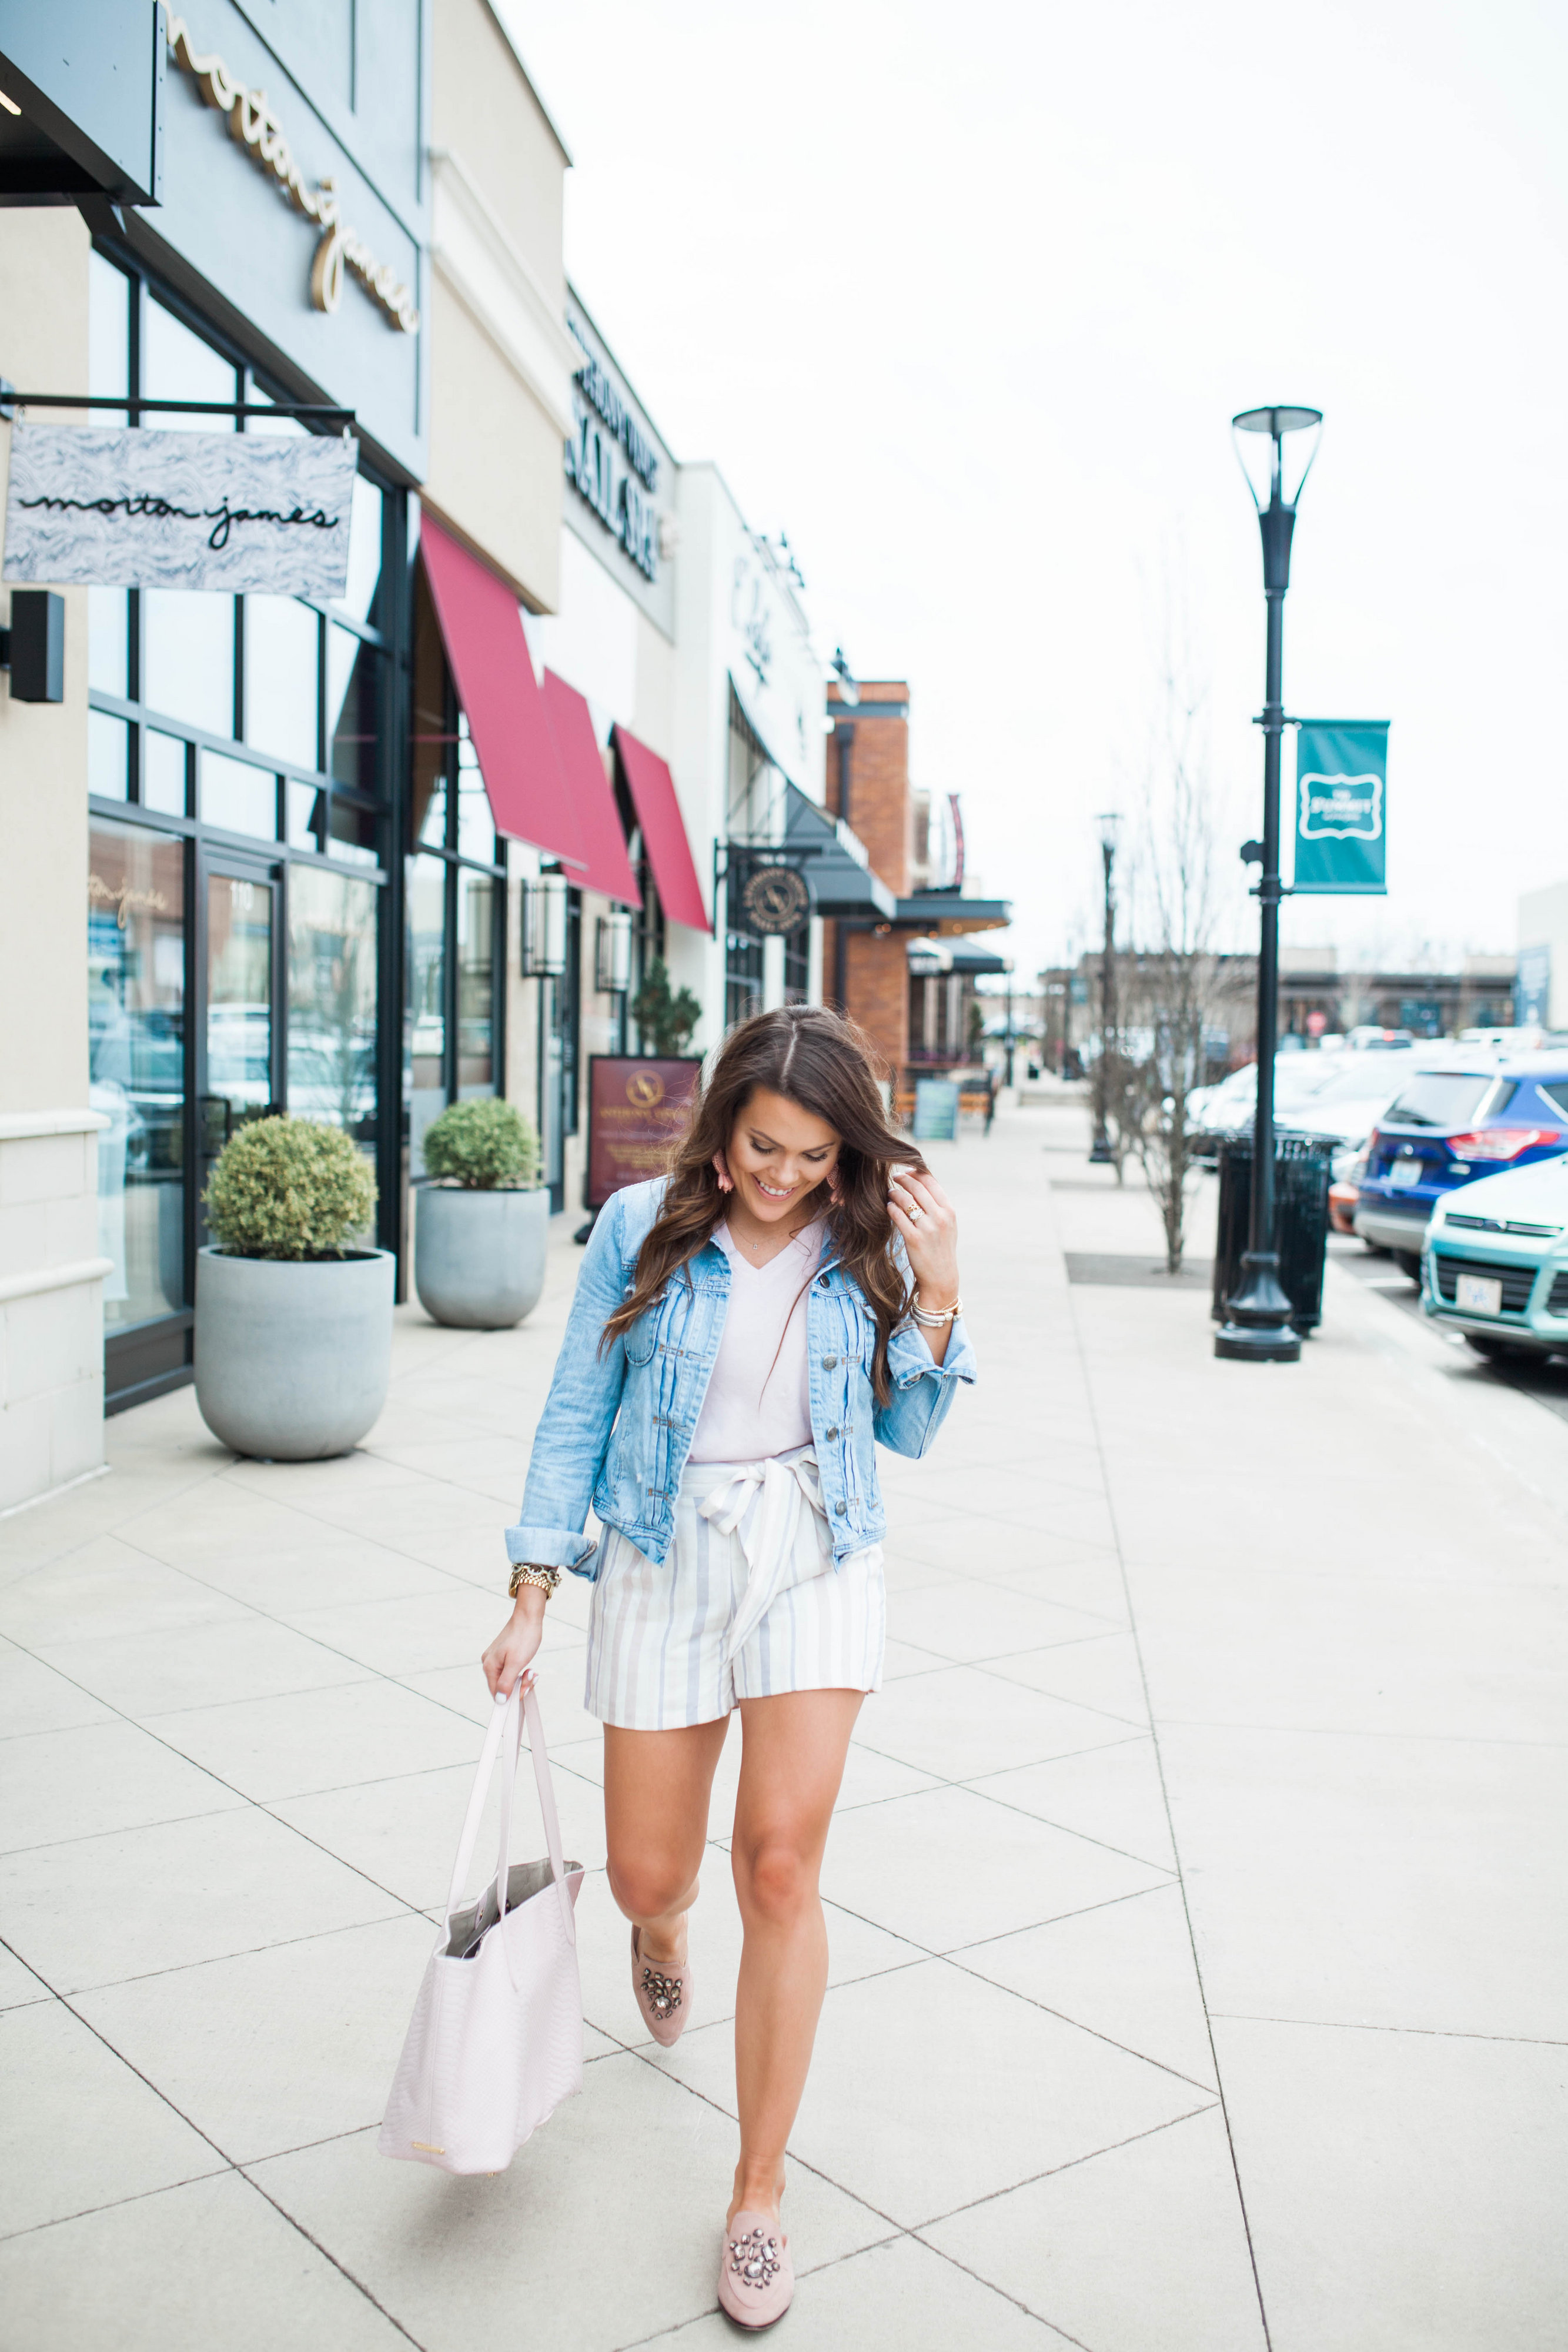 Spring Stripe Shorts / Spring Outfit Inspo / How to style a denim jacket for spring